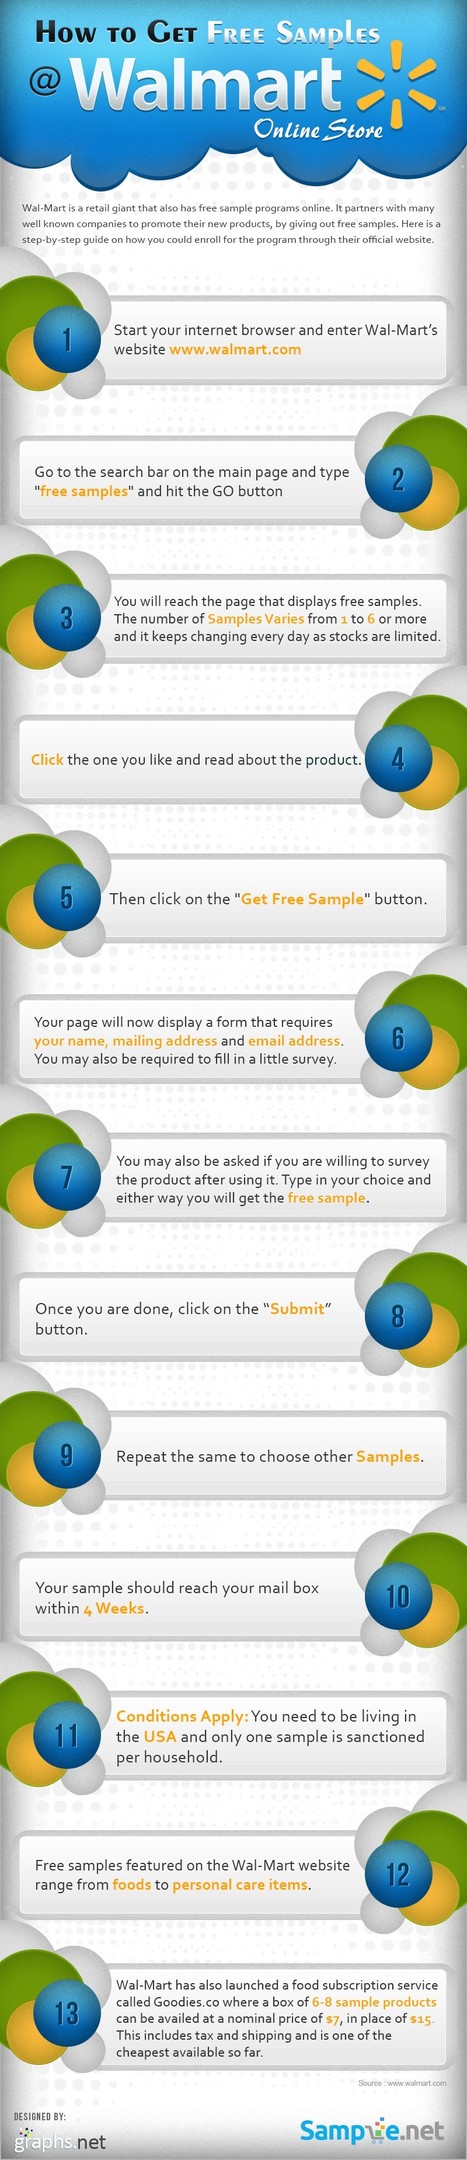 How to Get Free Samples at Walmart Online Store | All Infographics | All Infographics | Scoop.it